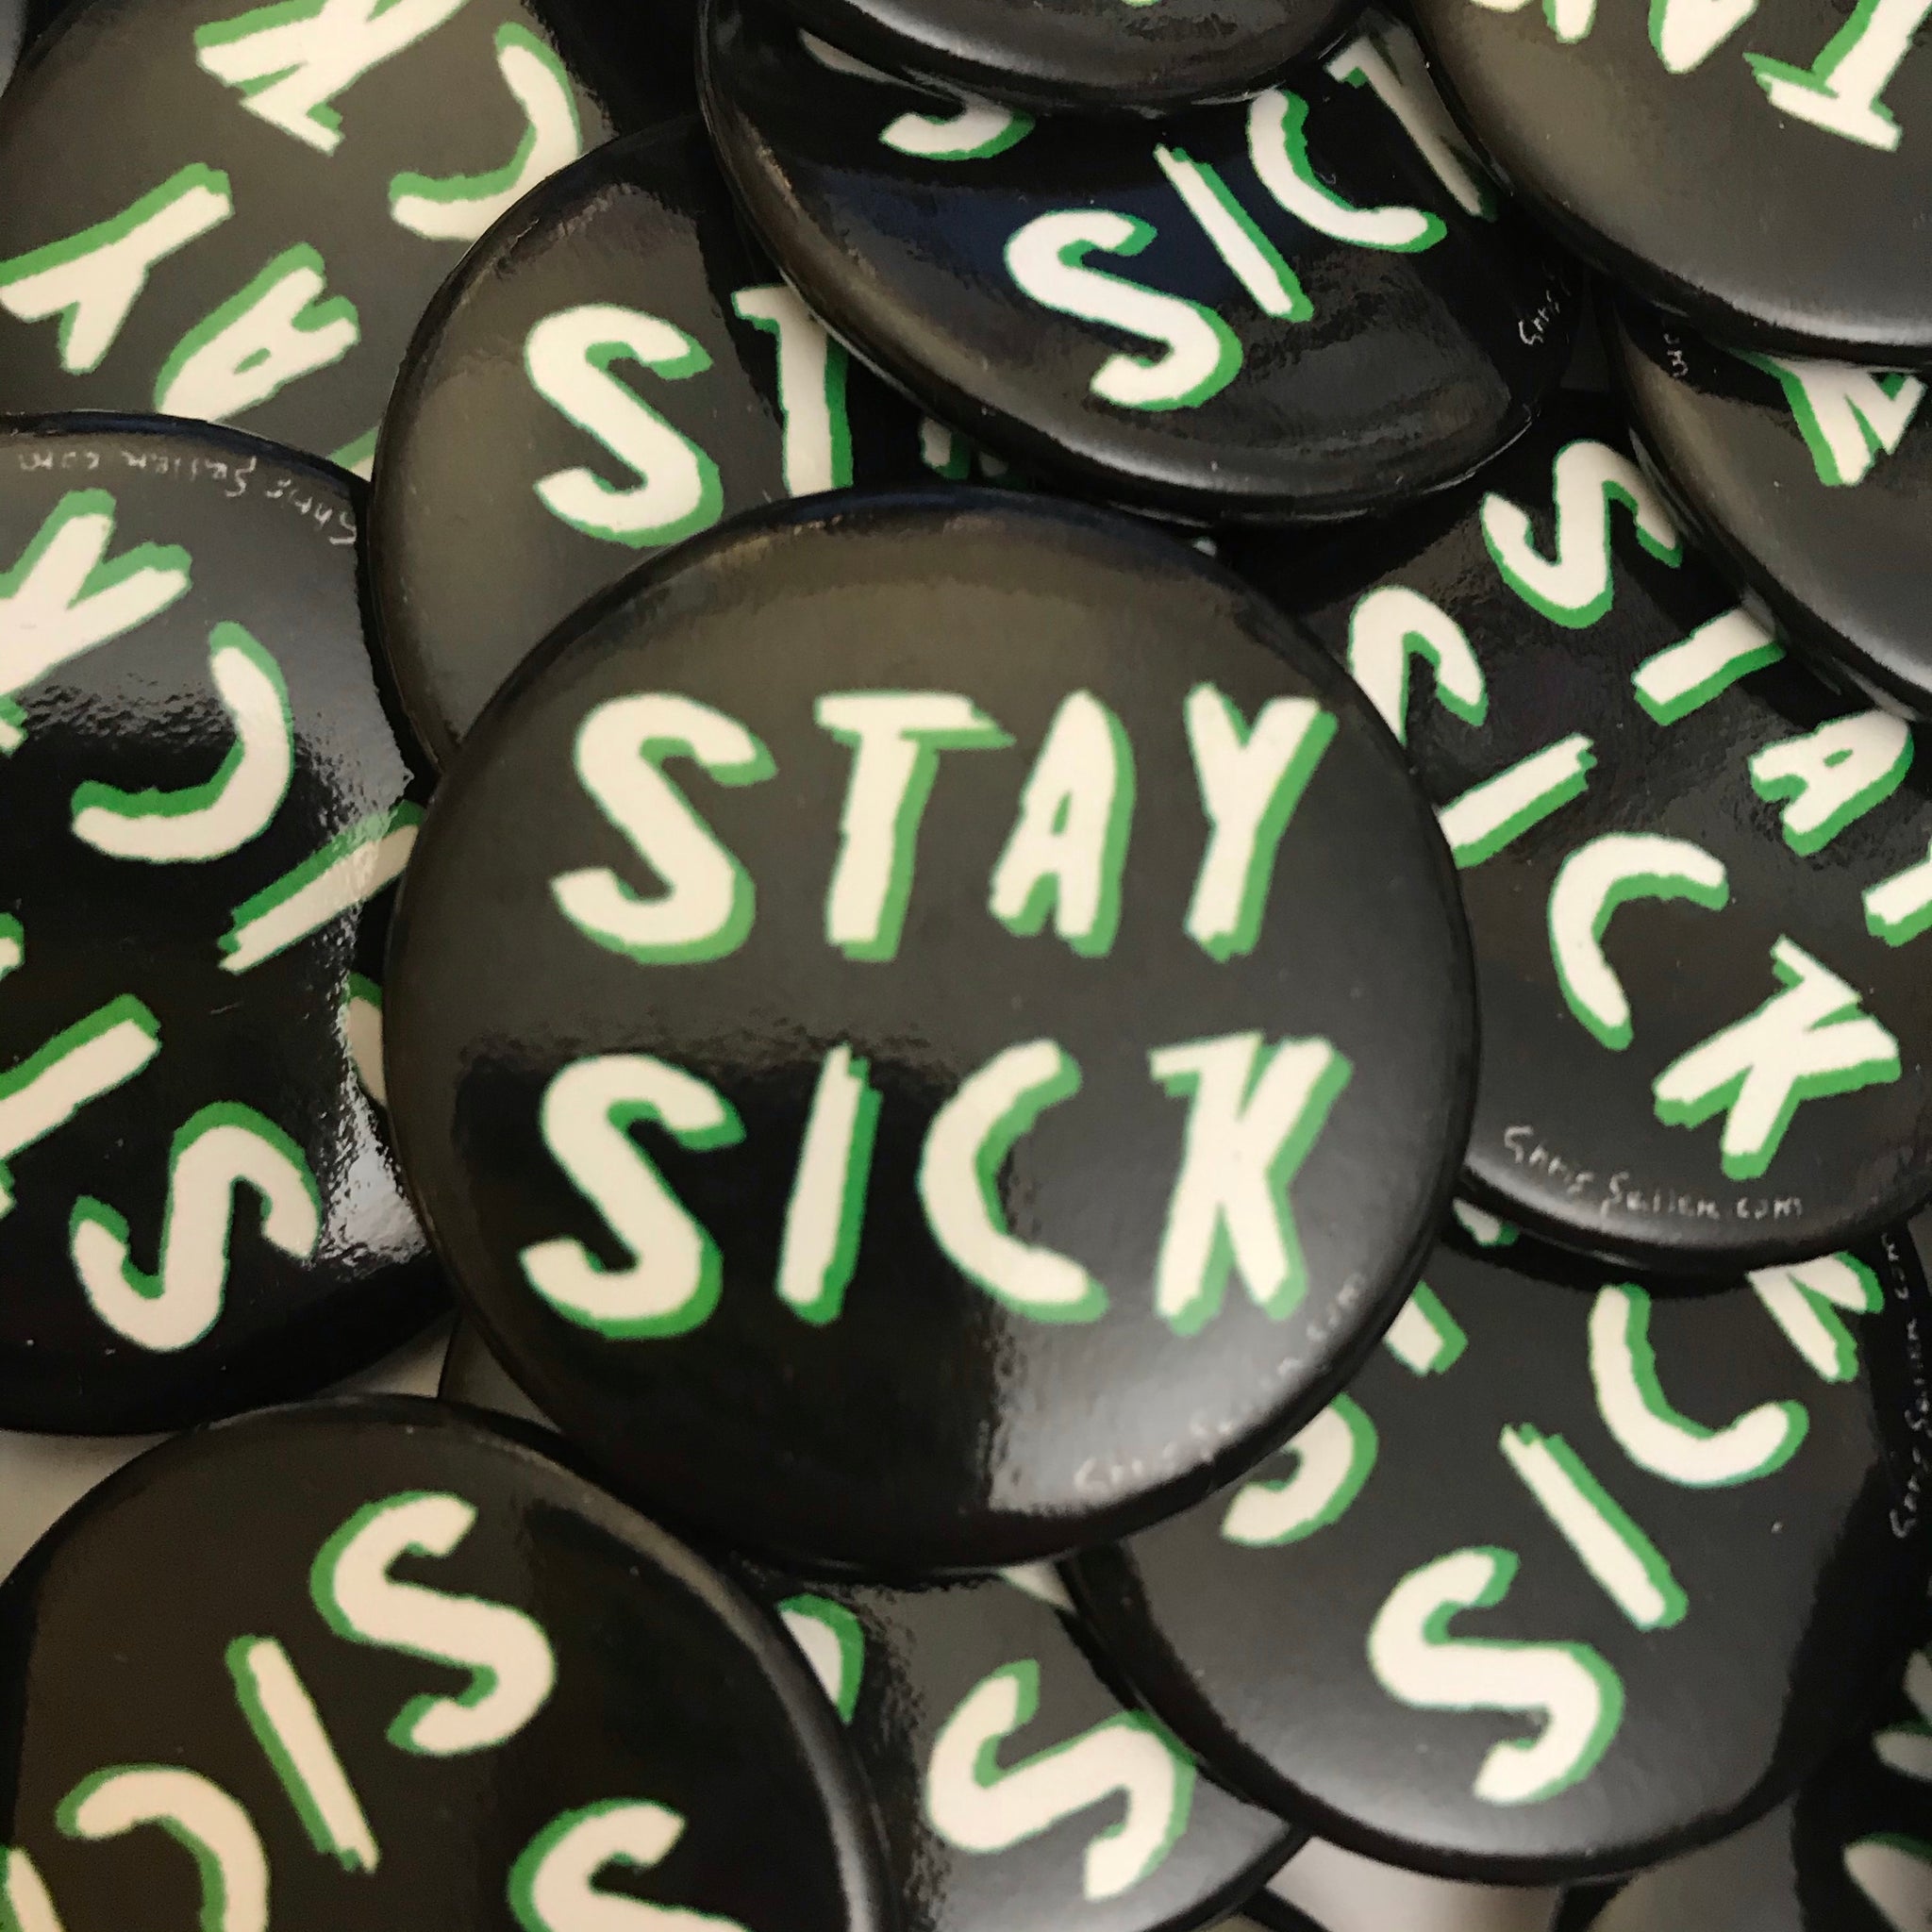 Stay Sick- Button